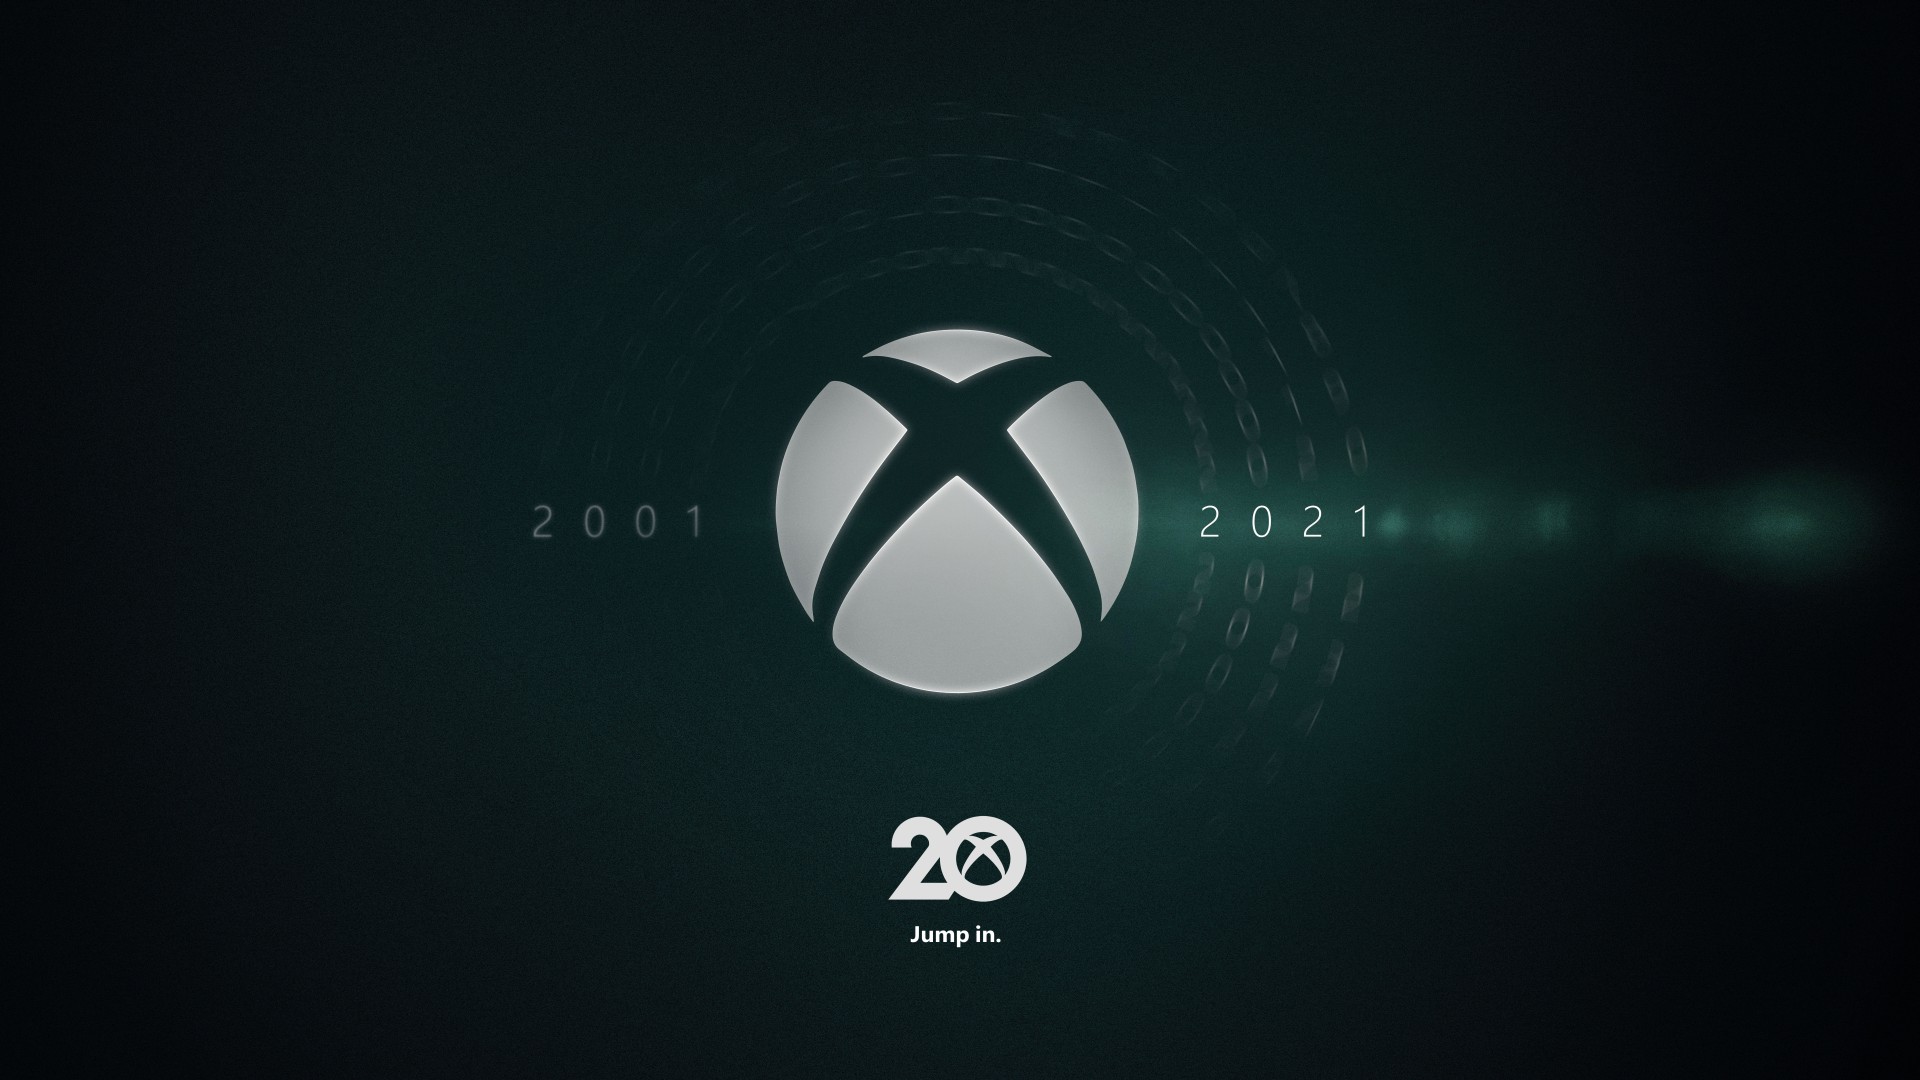 Video For Celebrating 20 Years of Xbox